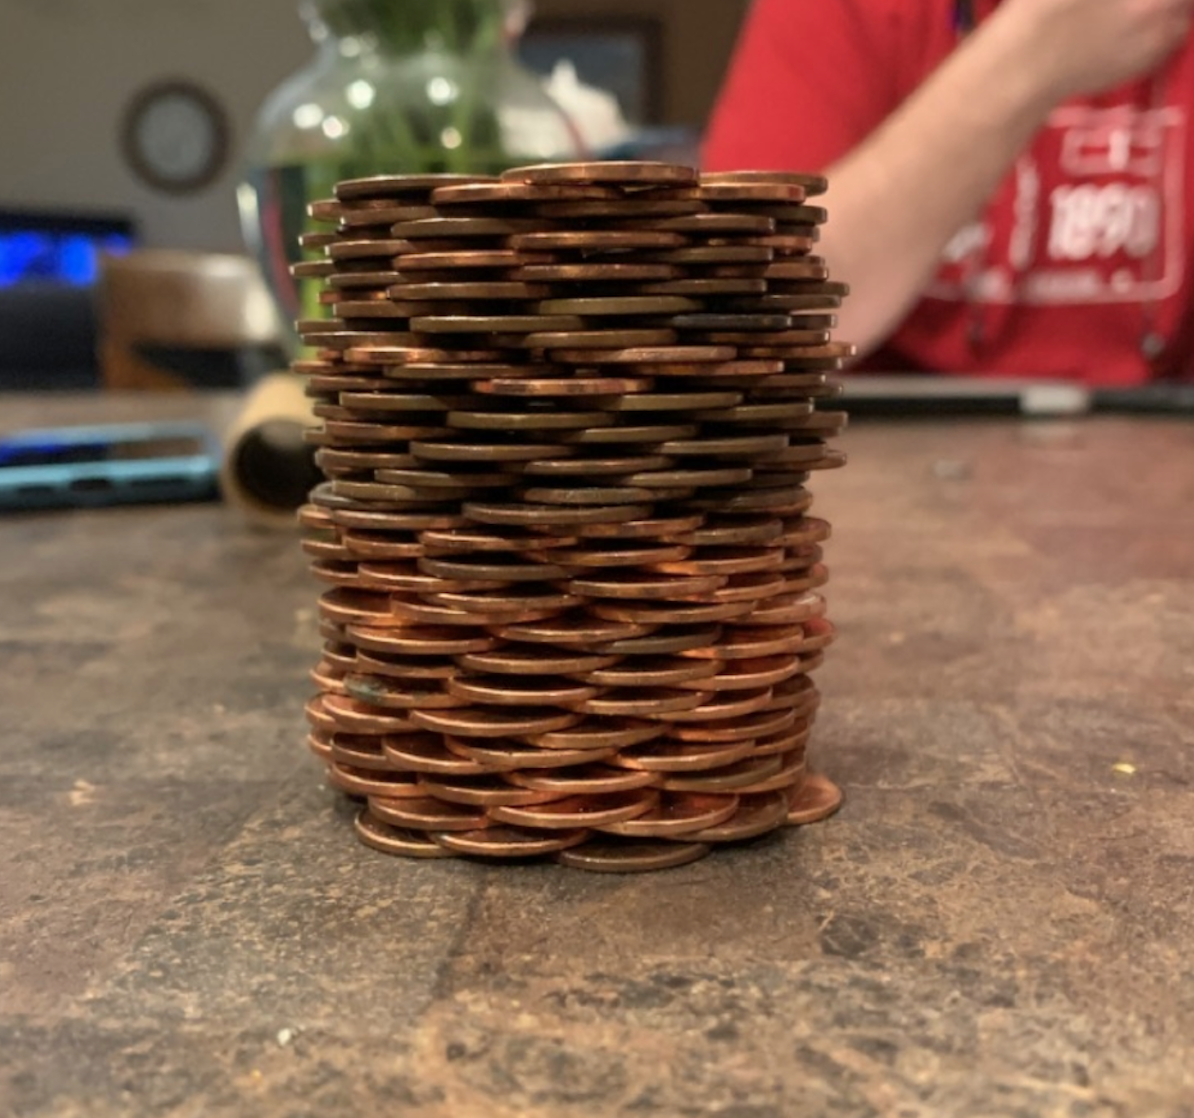 A stack of pennies on a table